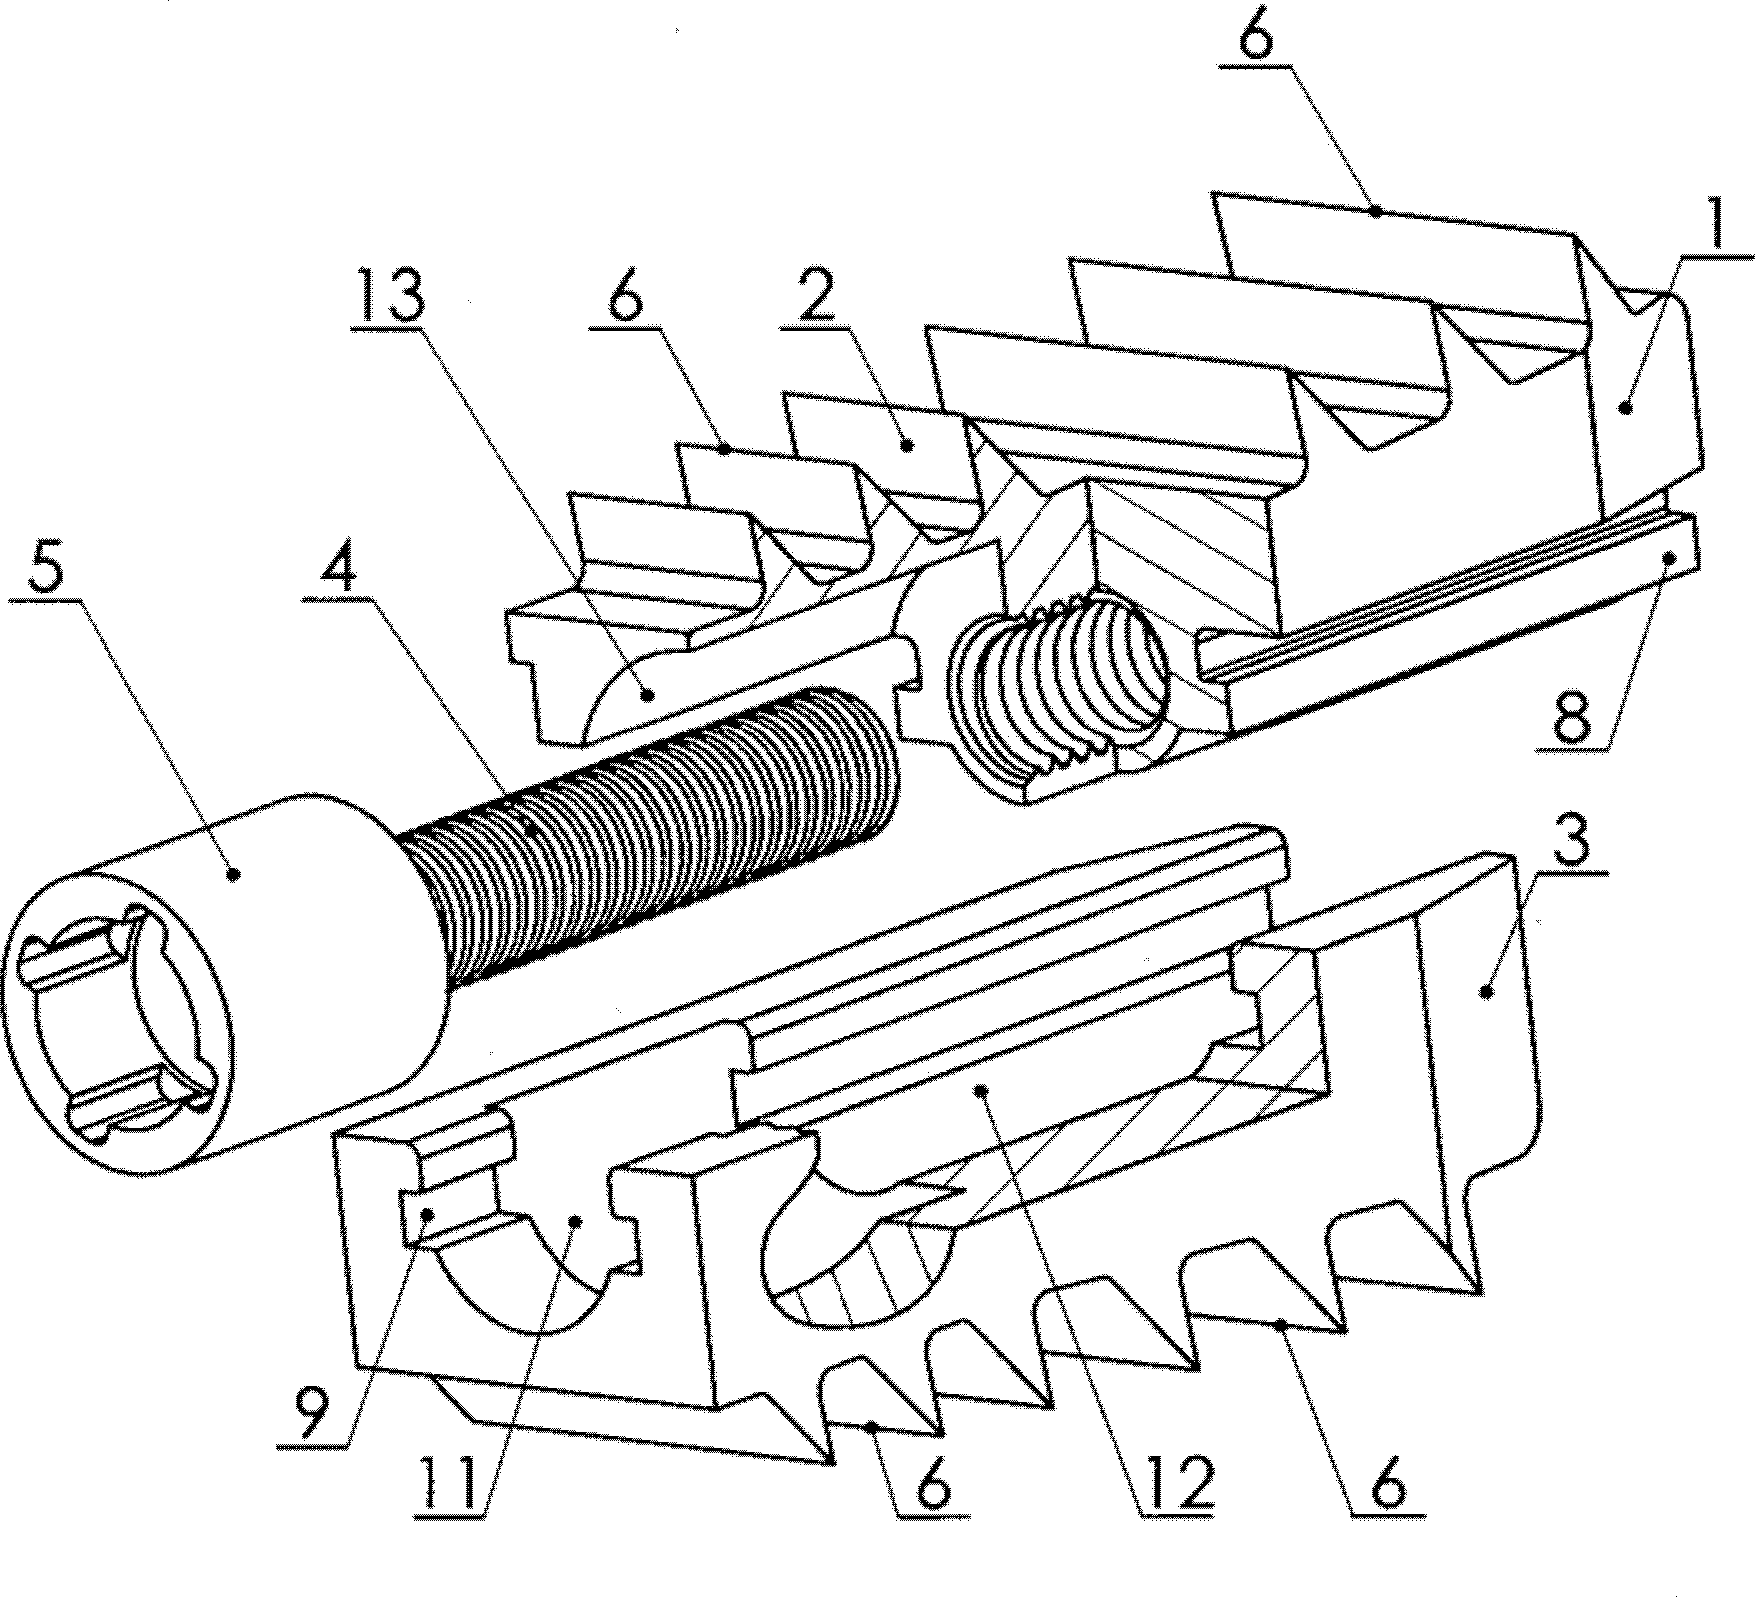 Device for surgical displacement of vertebrae